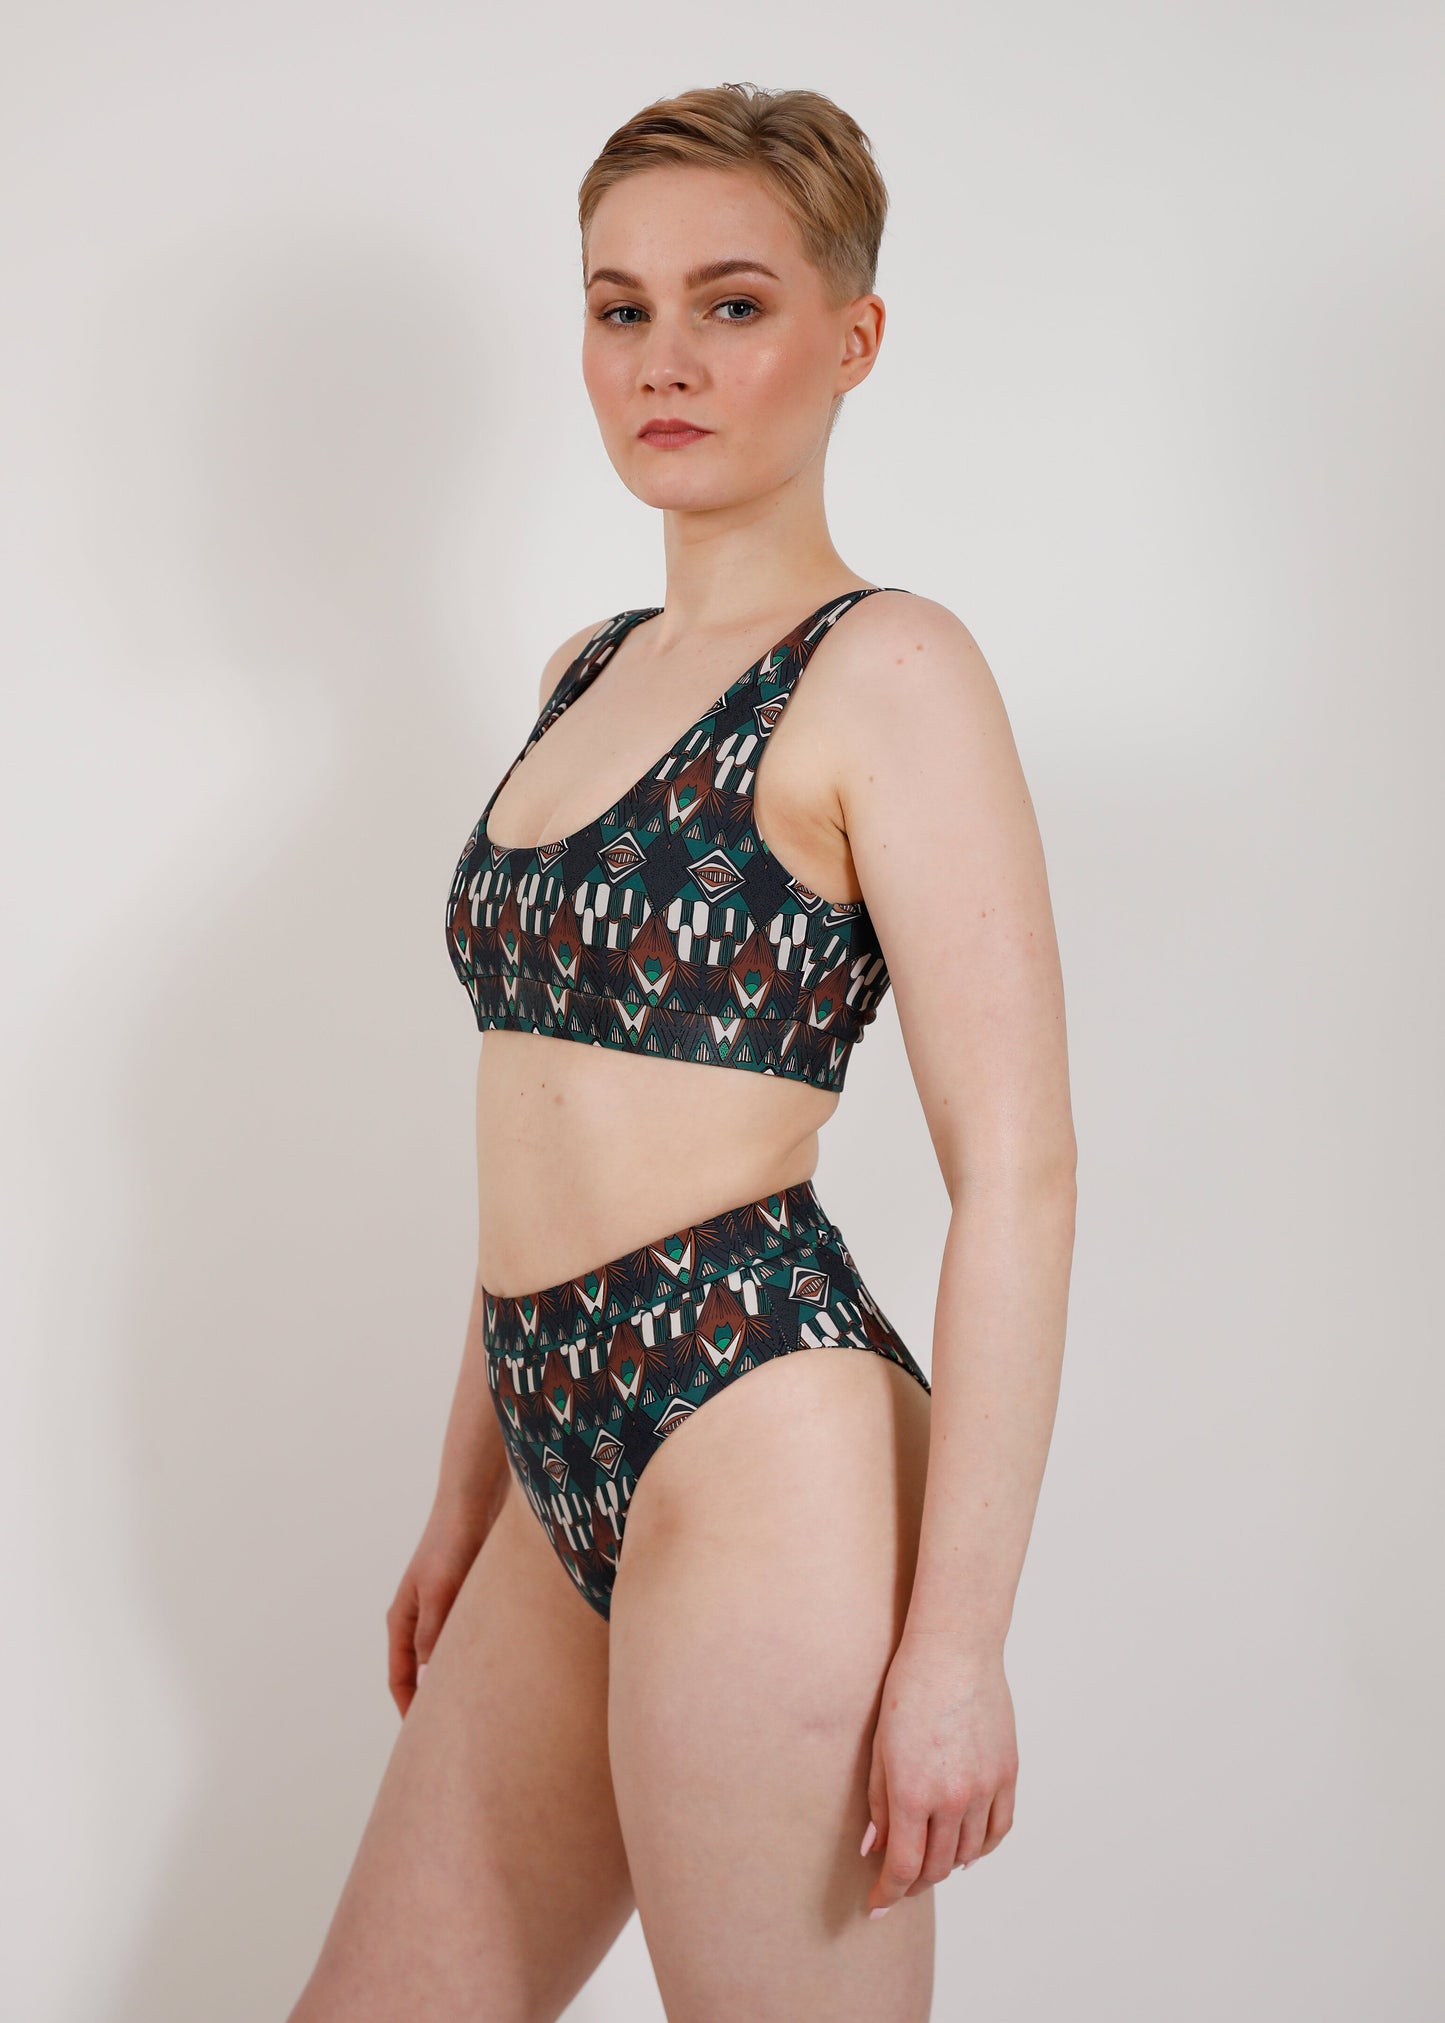 model with sustainable high cut bikini bottom and sporty top 